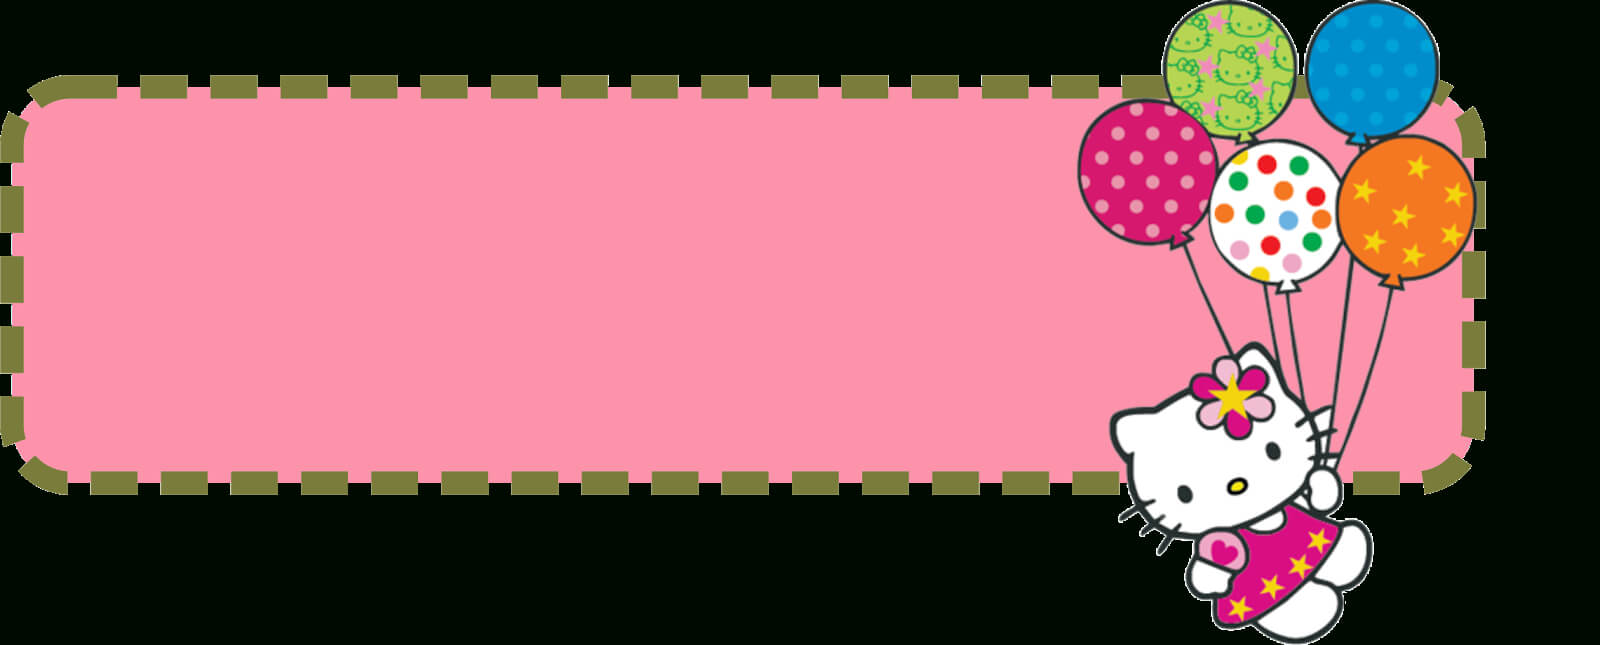 Hello Kitty Banner Template | Banner And Forum Templates Within Hello Kitty Banner Template